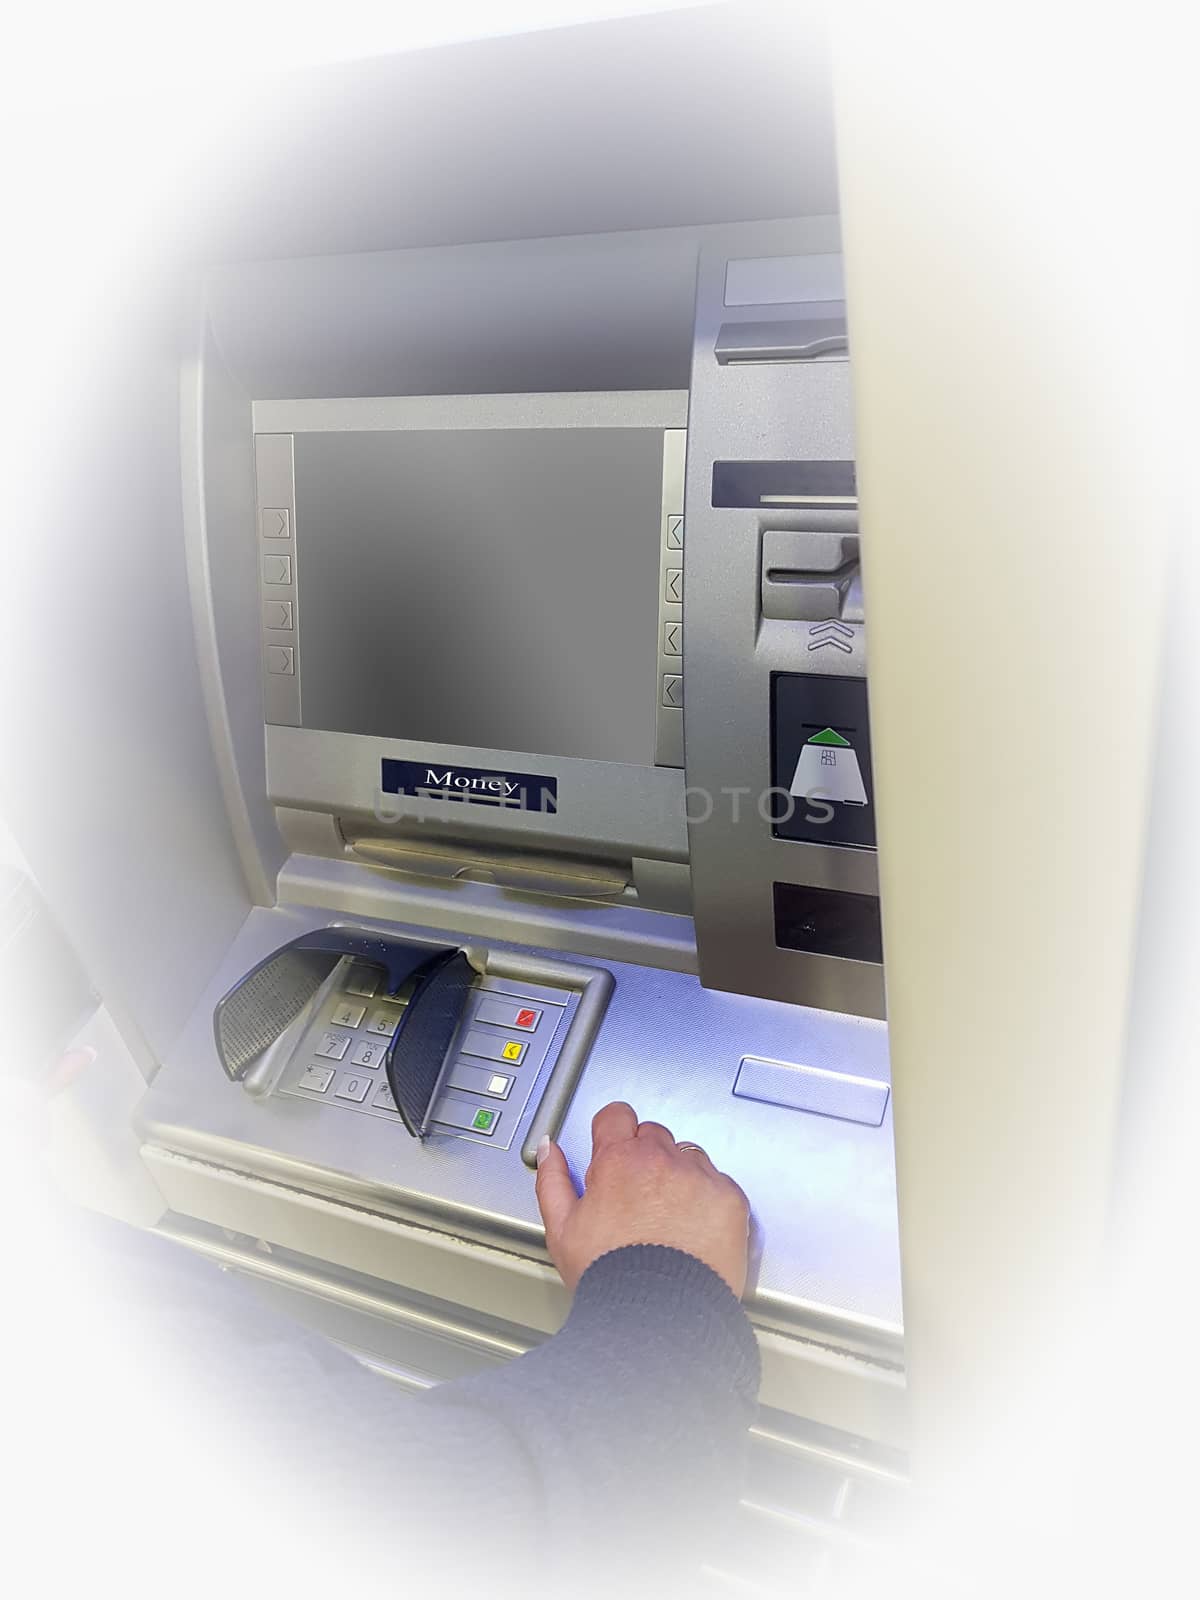 Woman at an ATM cash machine with vignetting